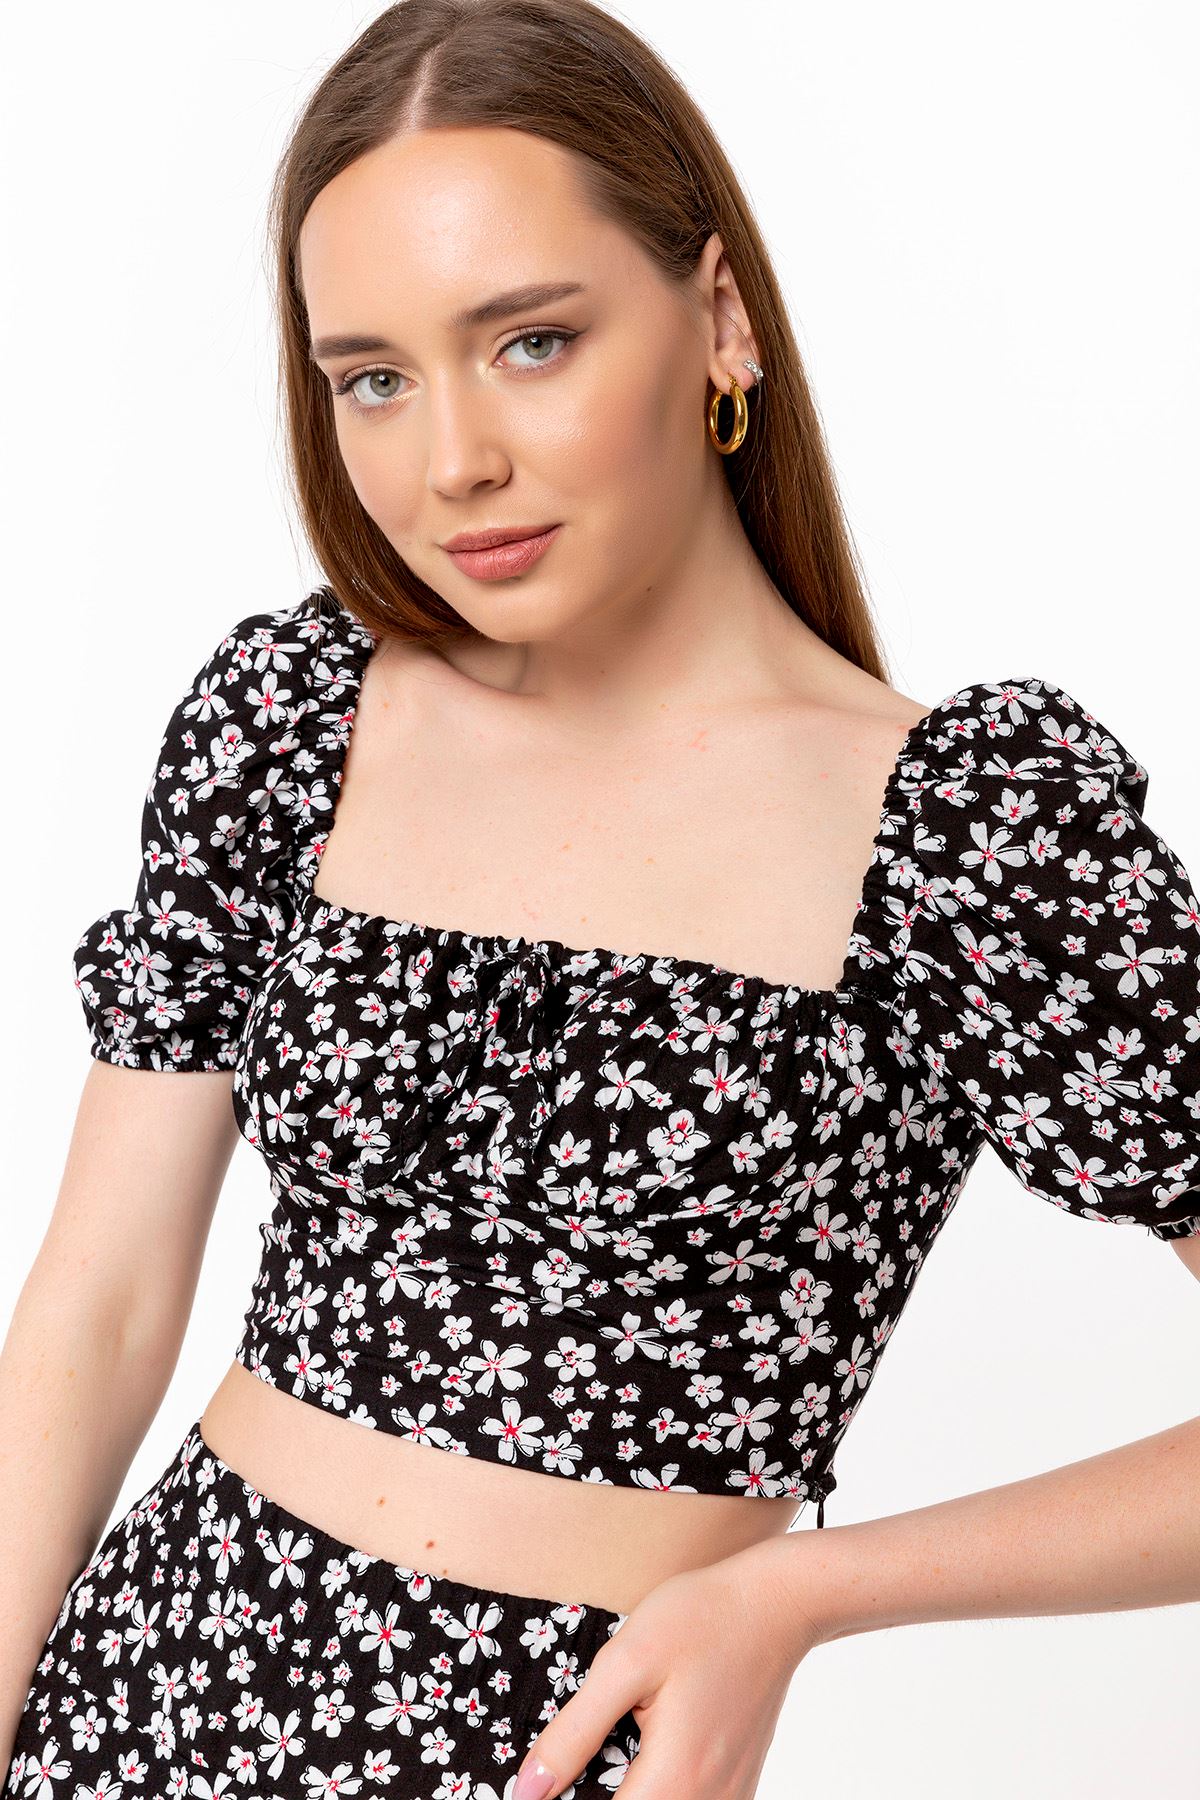 Viscose Fabric Balloon Sleeve Square Neckline Full Fit Floral Pattern Blouse - Black